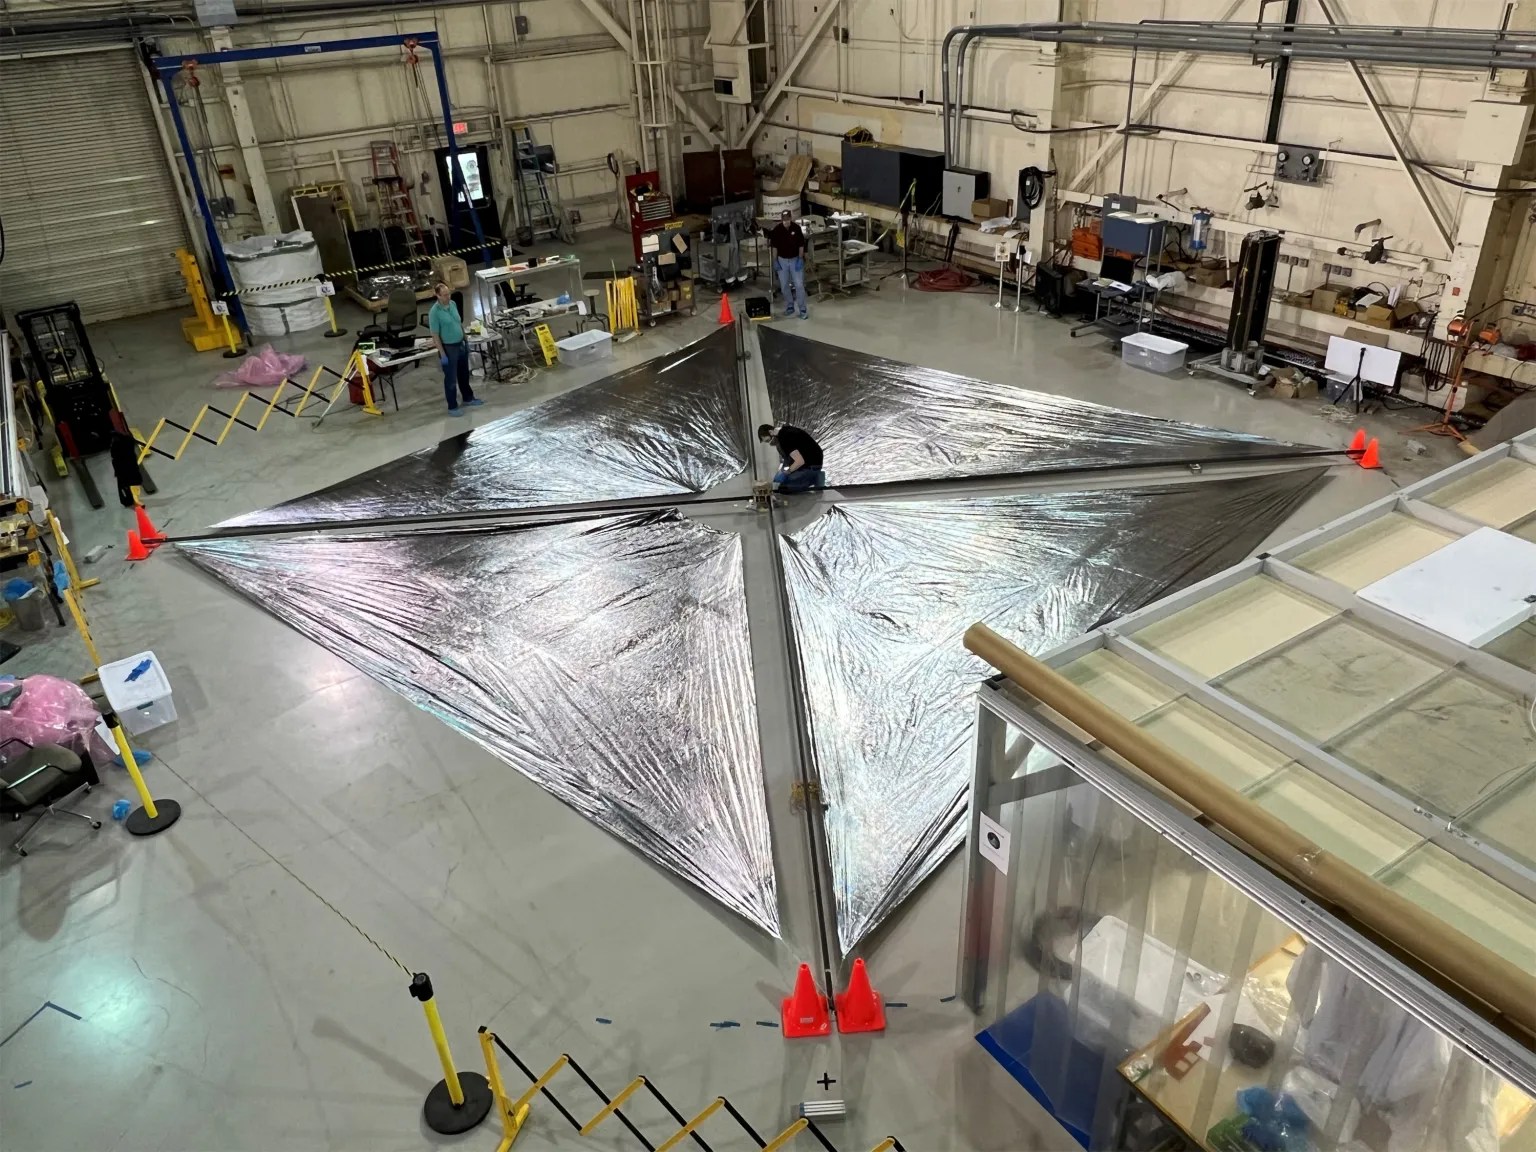 Engineers at NASA’s Langley Research Center test deployment of the Advanced Composite Solar Sail System’s solar sail. The unfurled solar sail is approximately 30 feet (about 9 meters) on a side. Since solar radiation pressure is small, the solar sail must be large to efficiently generate thrust.